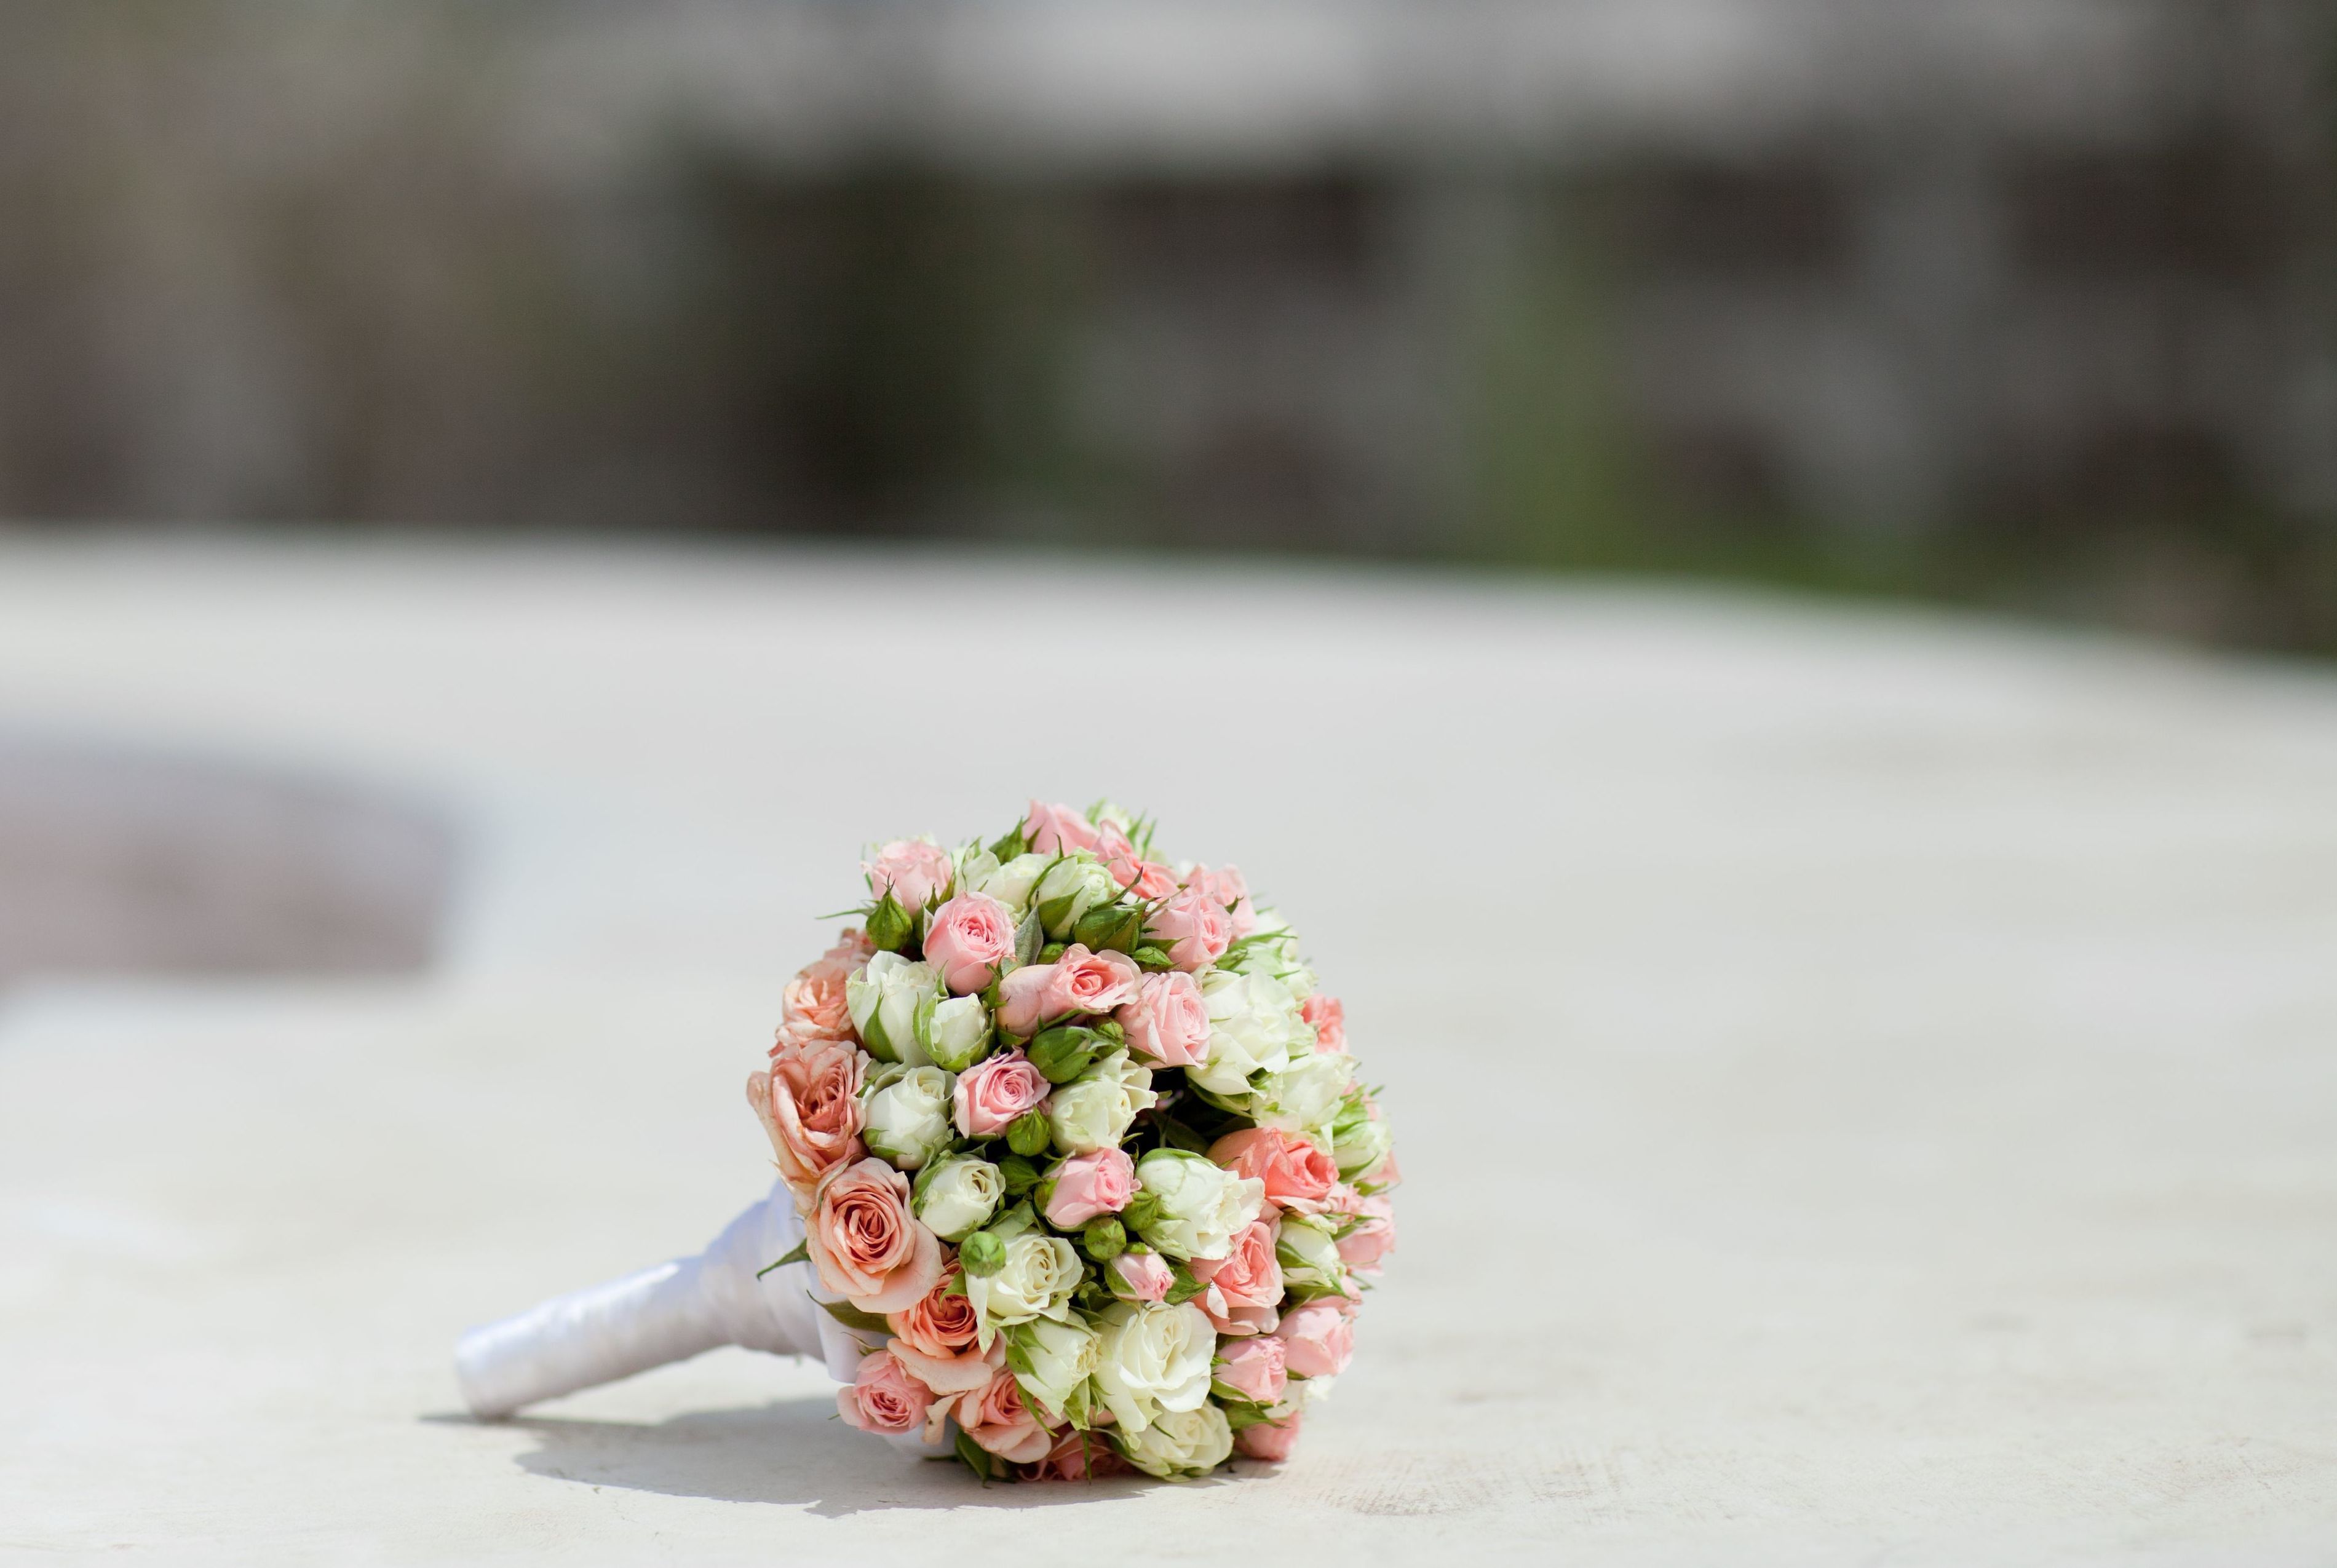 Wedding Bunch Of Flowers Photo Space Rose Wallpaper